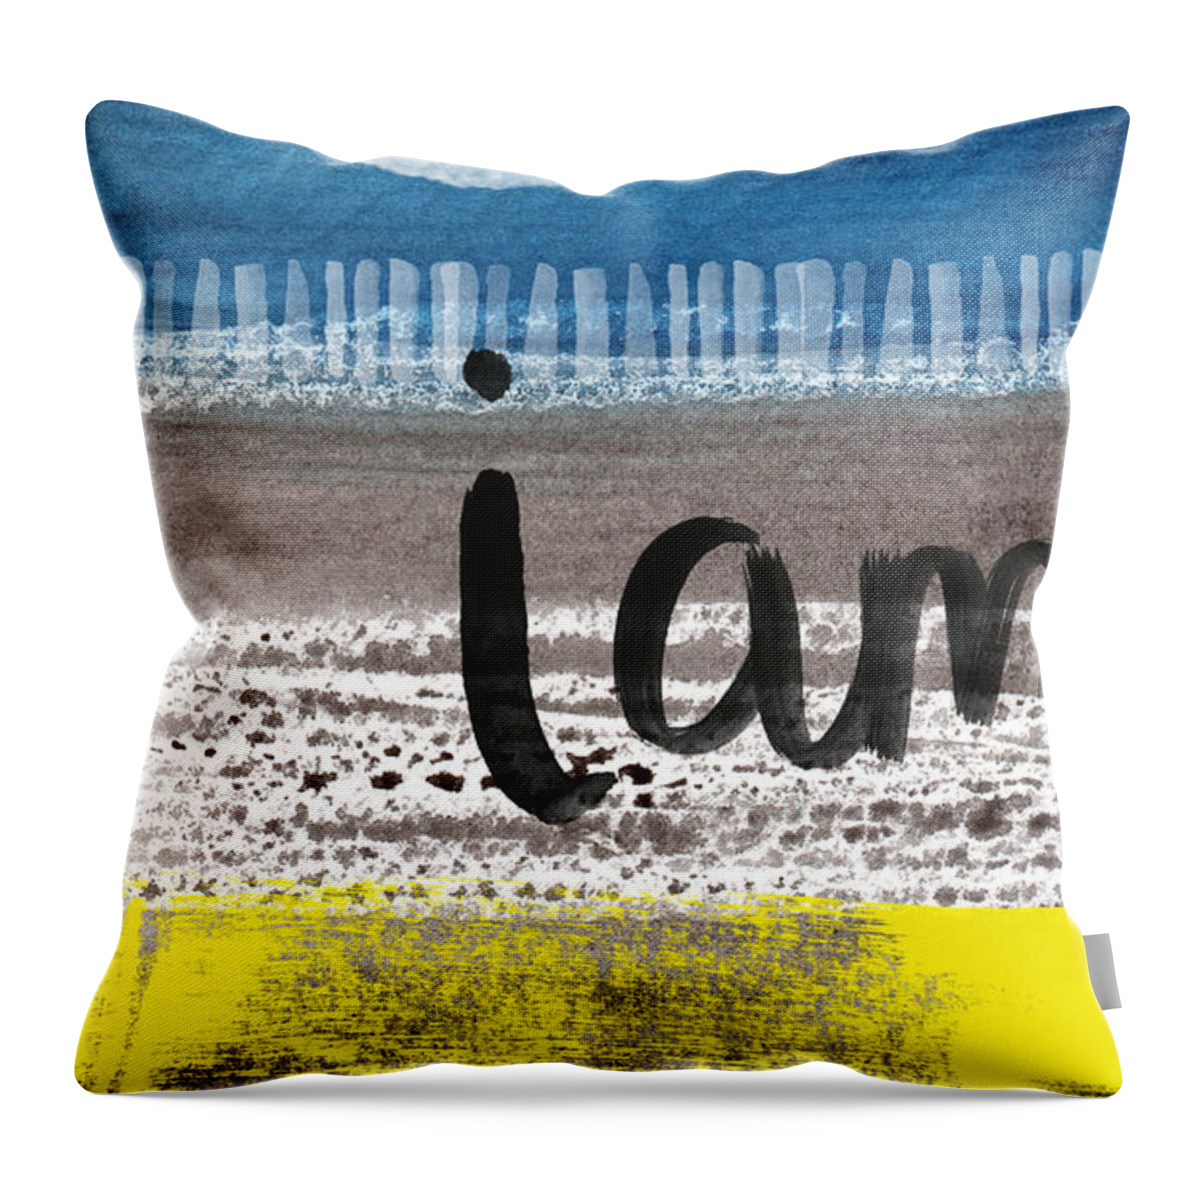 Abstract Landscape Throw Pillow featuring the painting I Am- abstract painting by Linda Woods